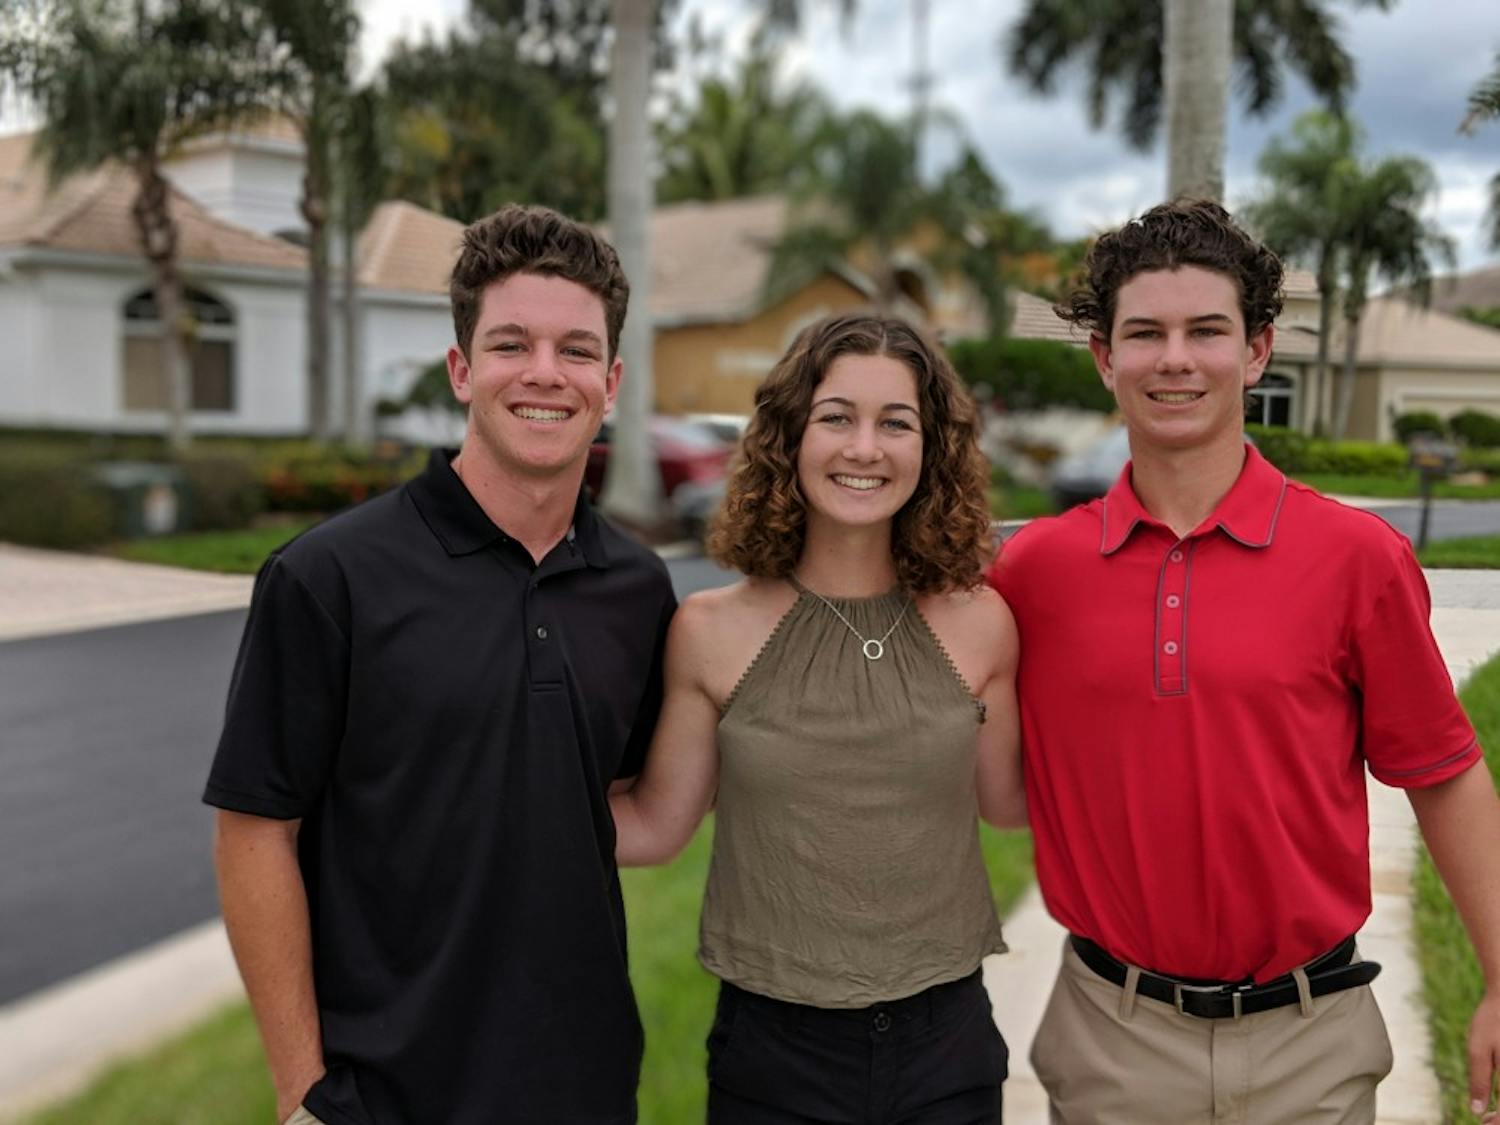 Emily Isaacman poses at Thanksgiving with younger brothers Max, 17, and Zach, 14. Max and Zach both attend Torrey Pines High School in San Diego.